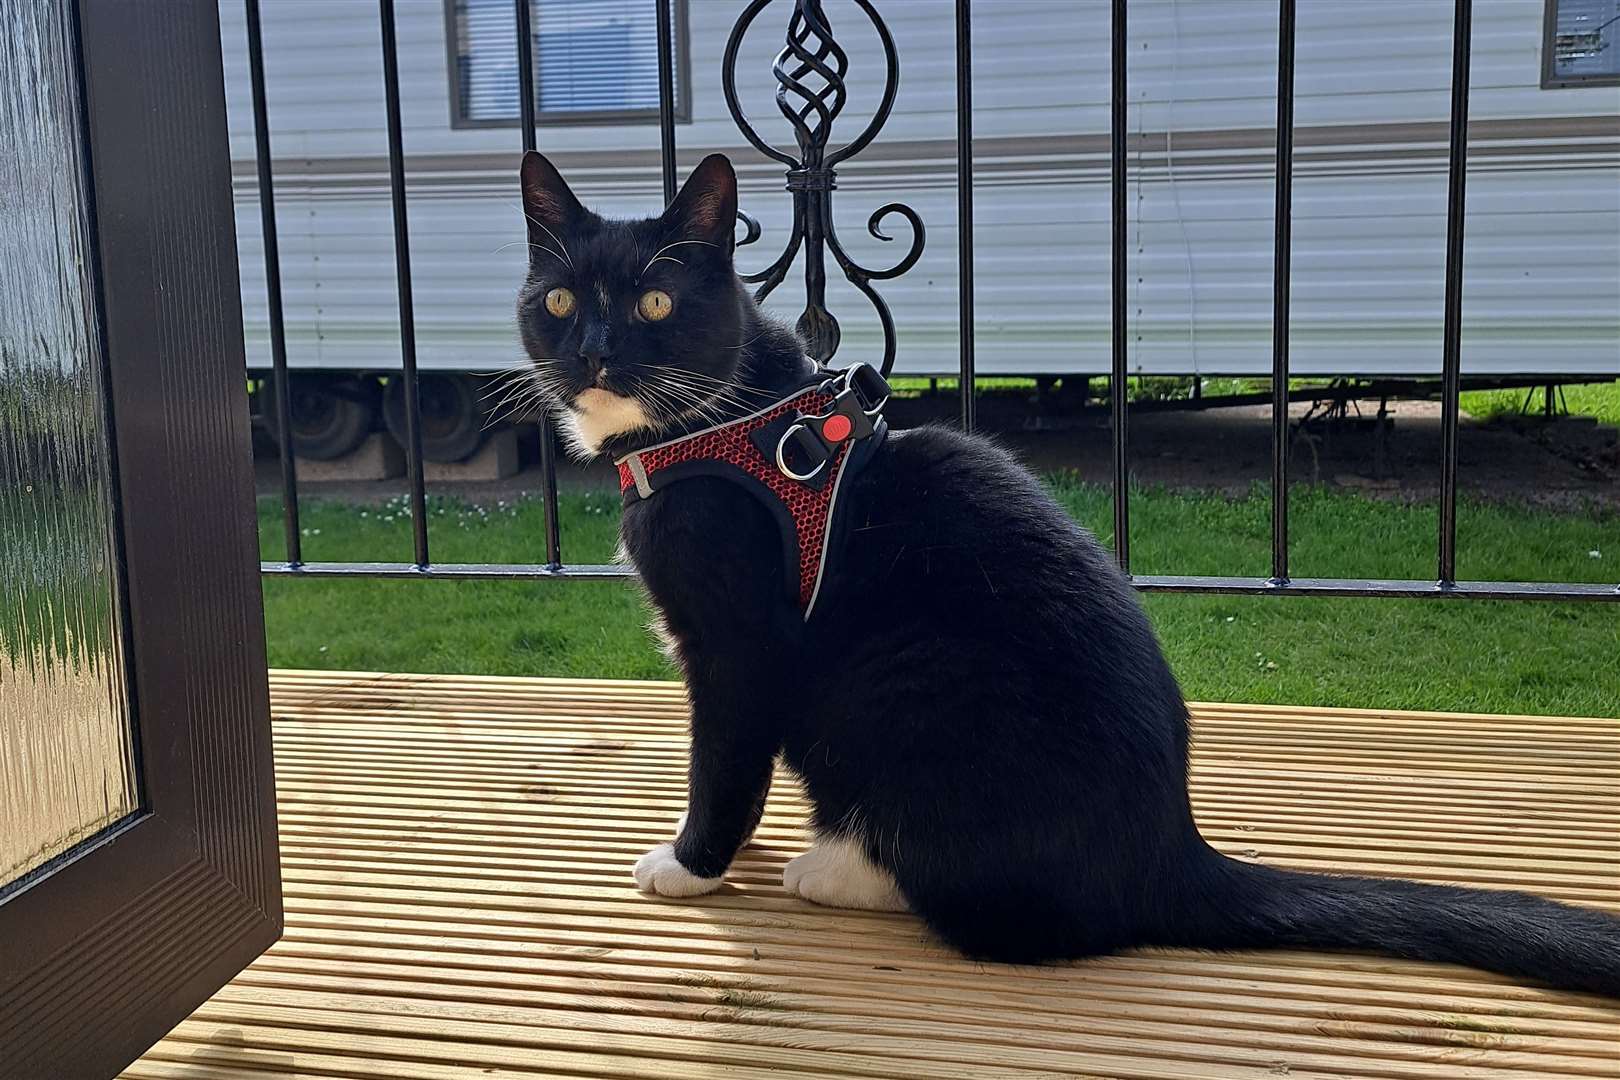 PJ practising for his lifejacket fitting with his harness. Picture: Karolina Rafalko